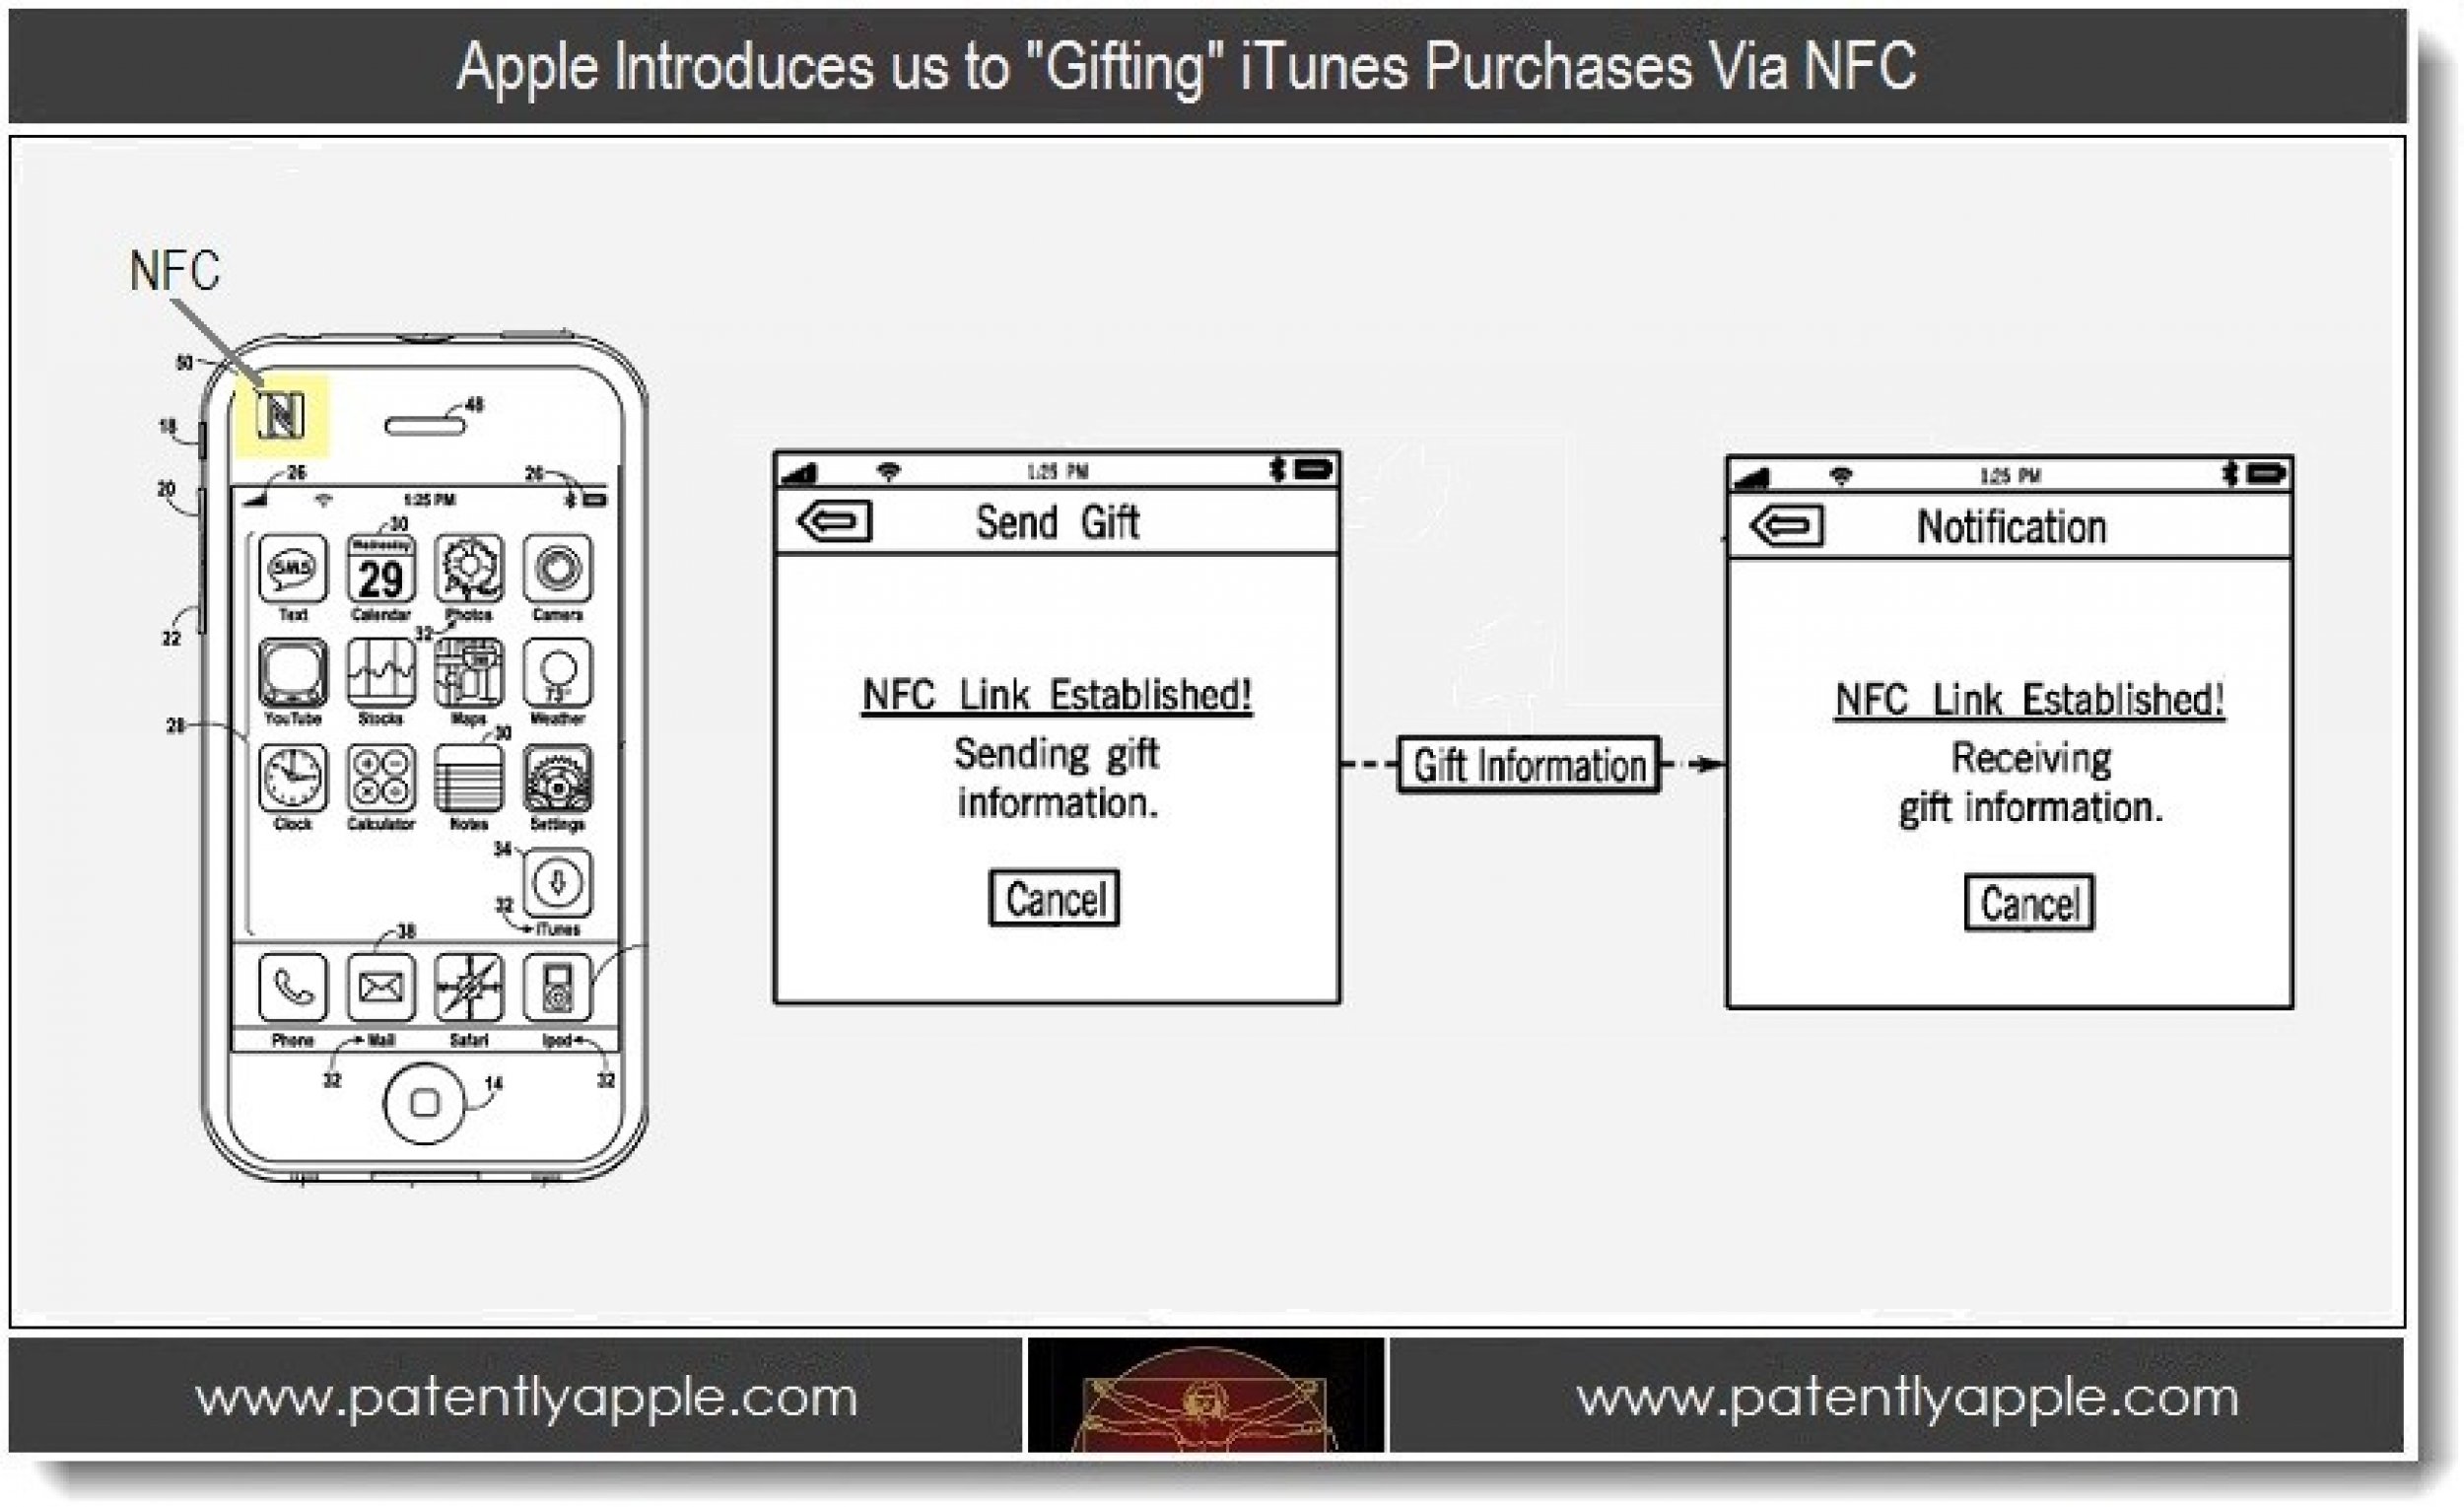 iPhone 5 Features - Apple Develops NFC Patent For Gift-Giving Through iTunes